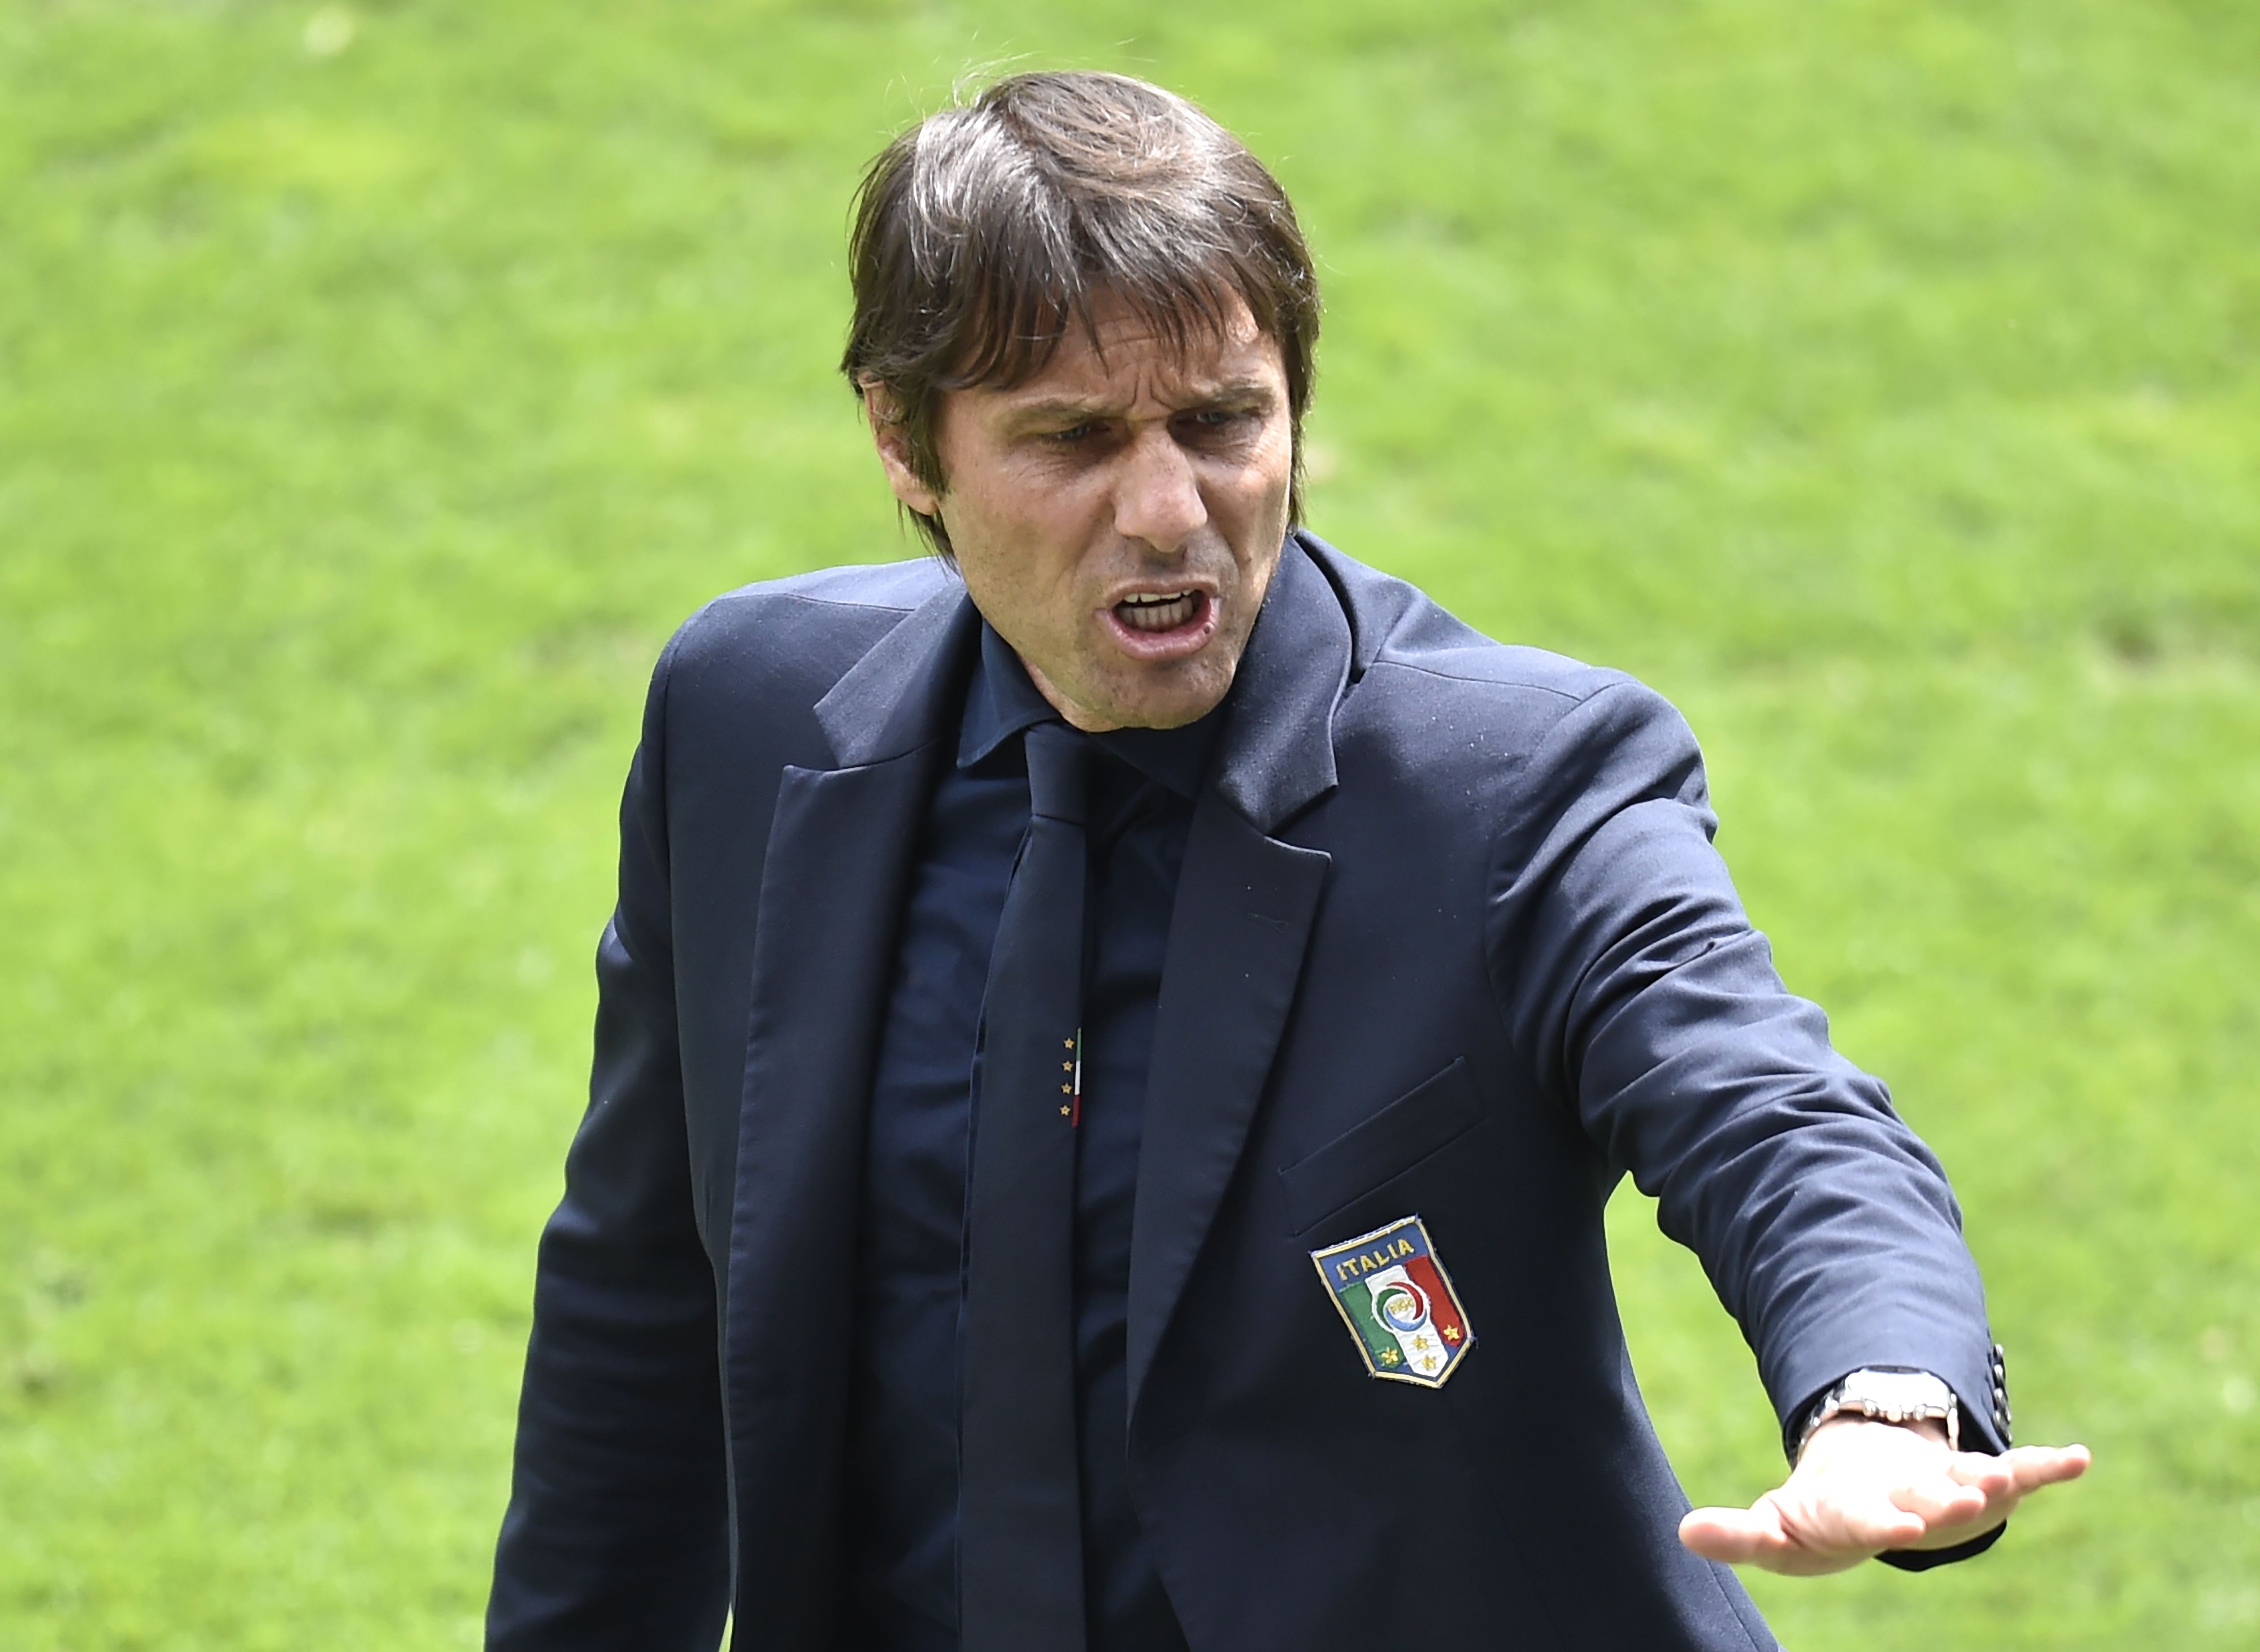 Euro 2016: Conte wants Italian fans to show their pride